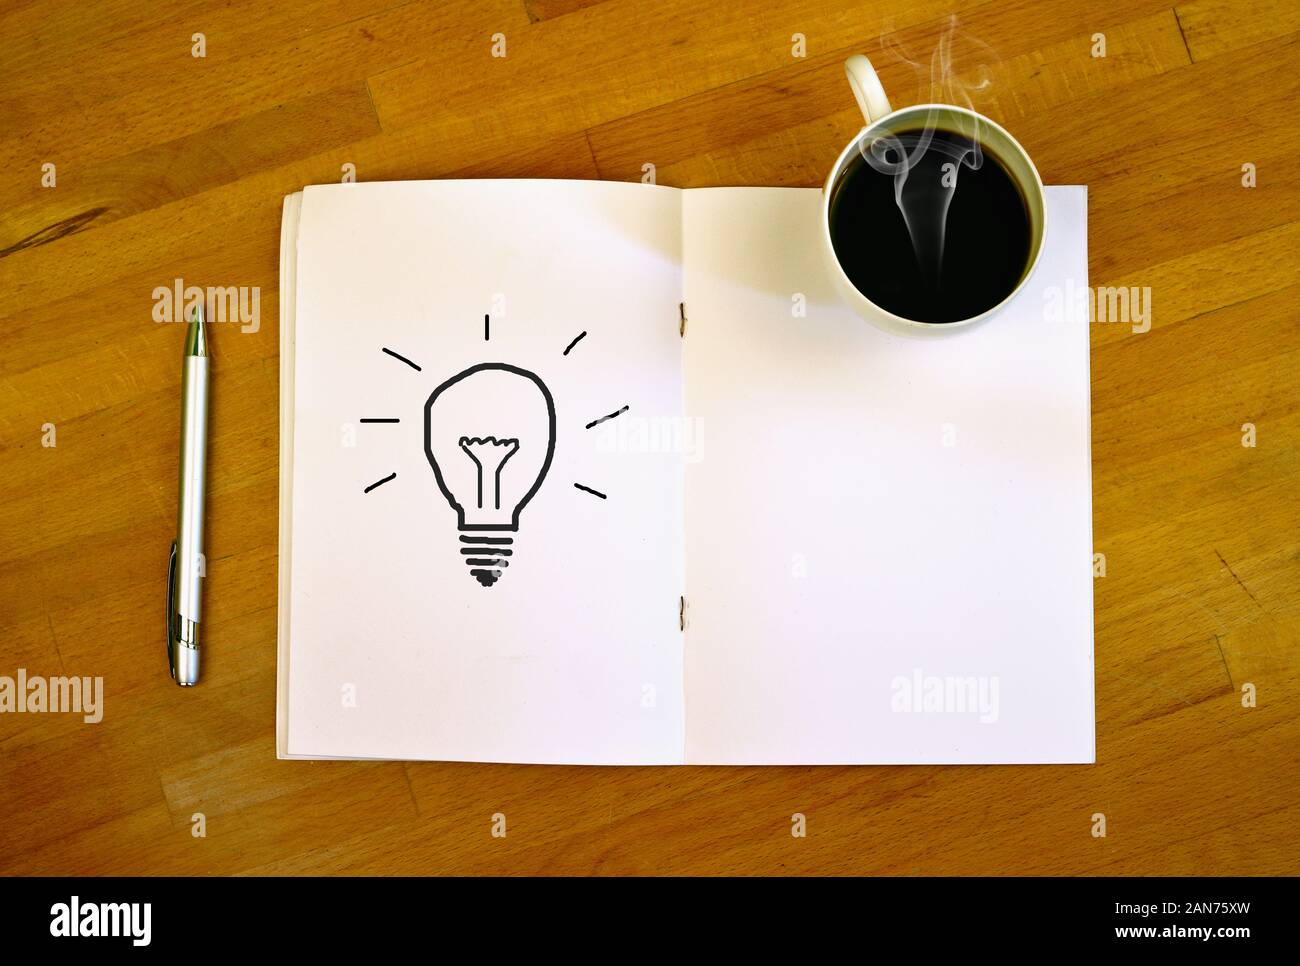 Working desk with hot coffee and paper with a lamp symbol Stock Photo